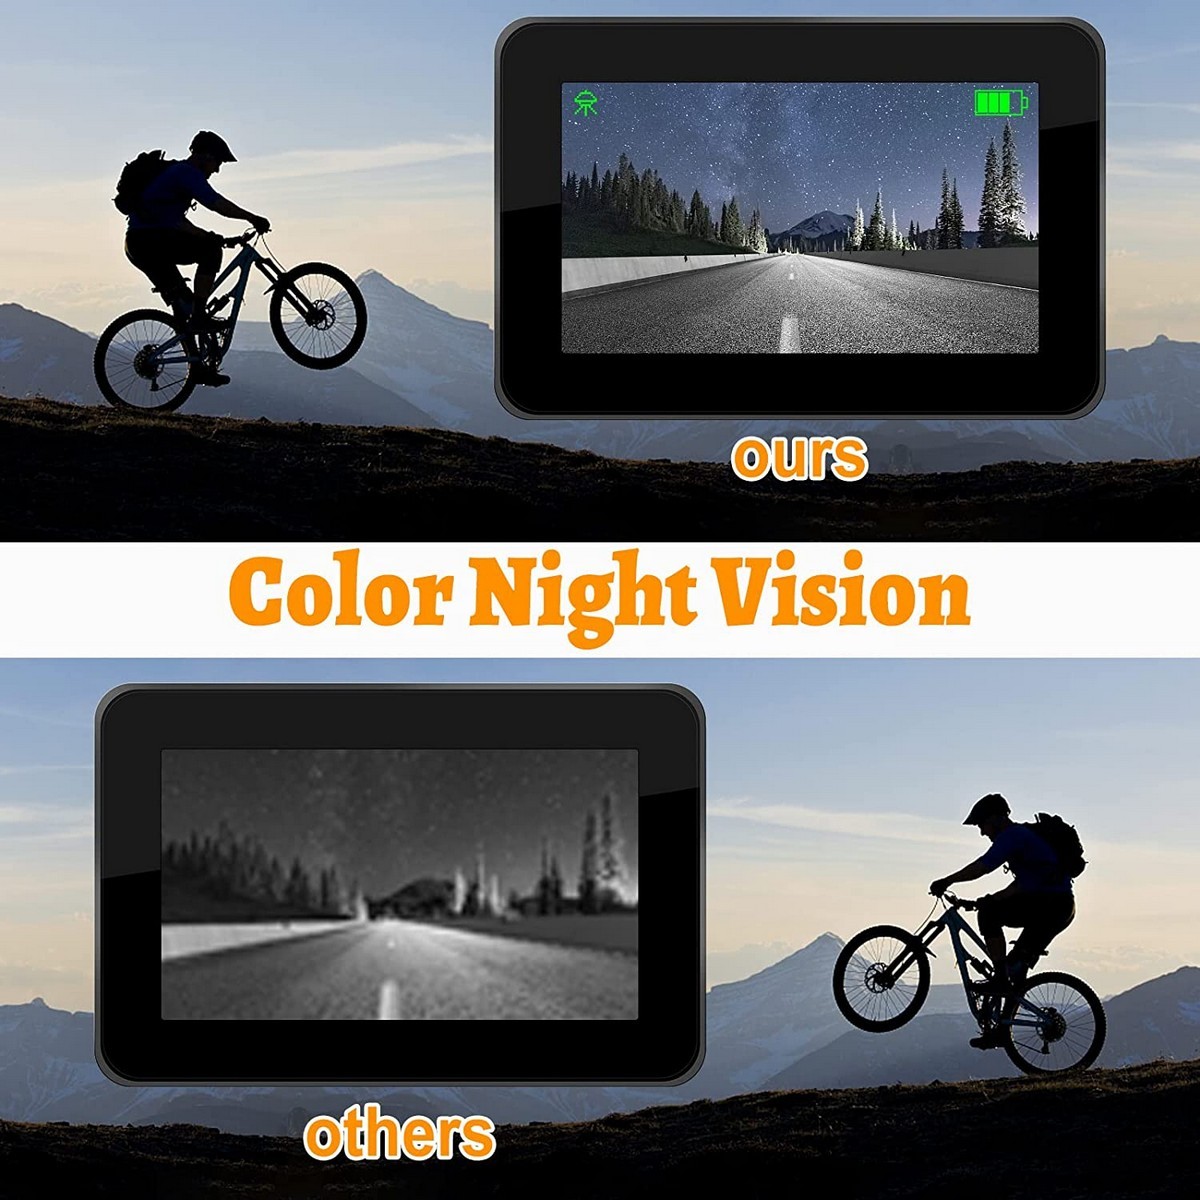 FULL HD bicycle camera with COLOR night vision